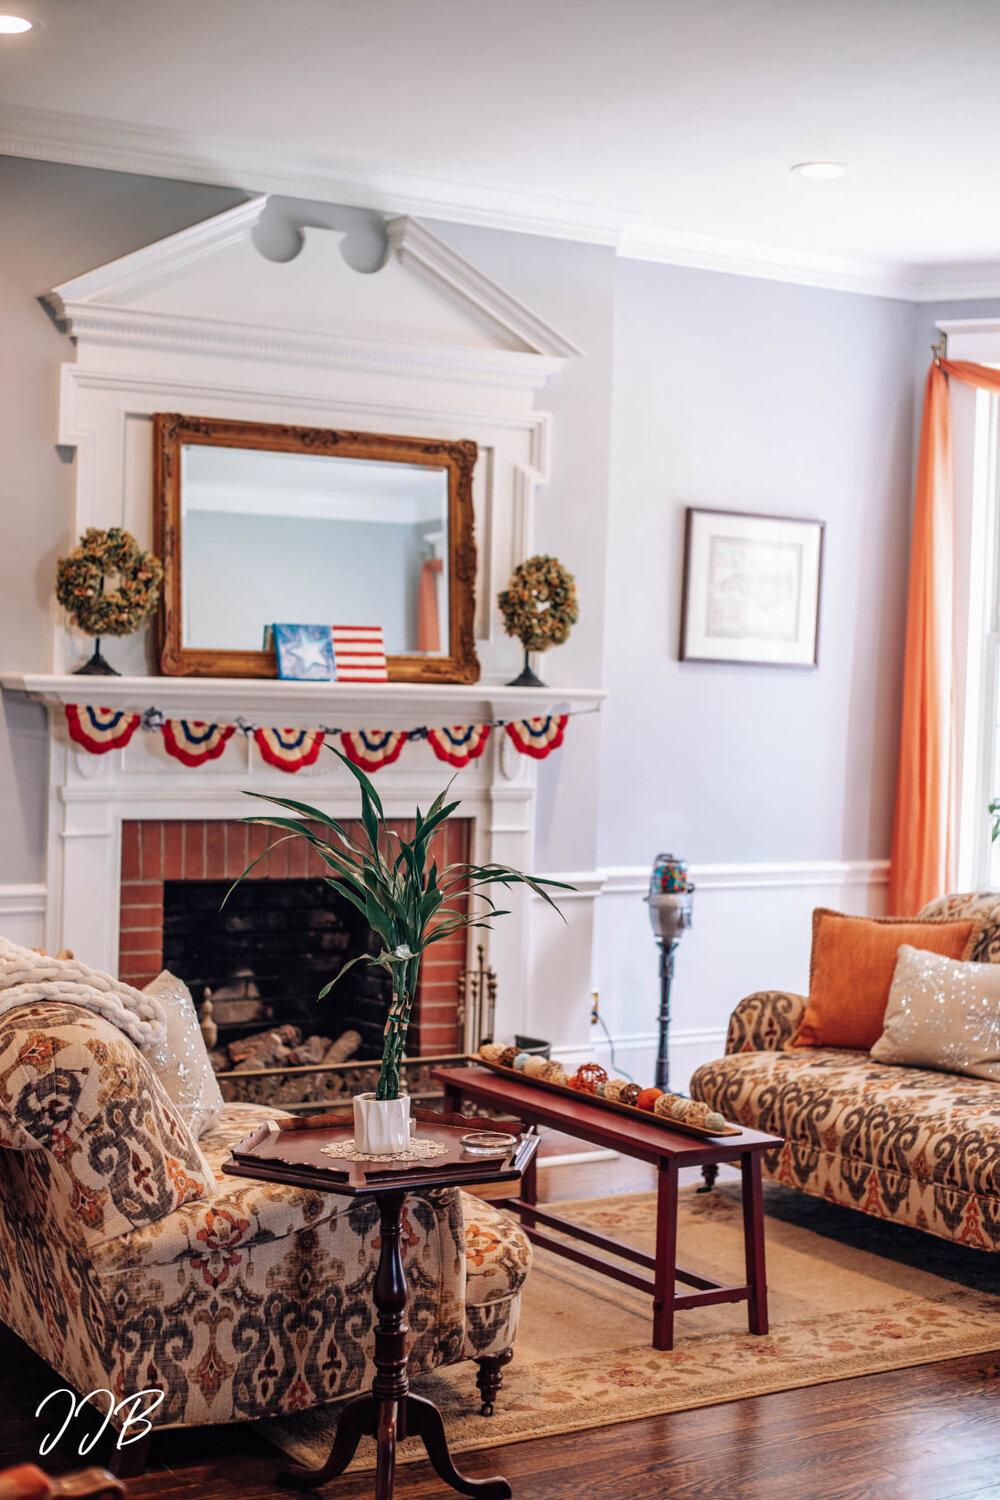 sweet tea bed and breakfast in conover north carolina